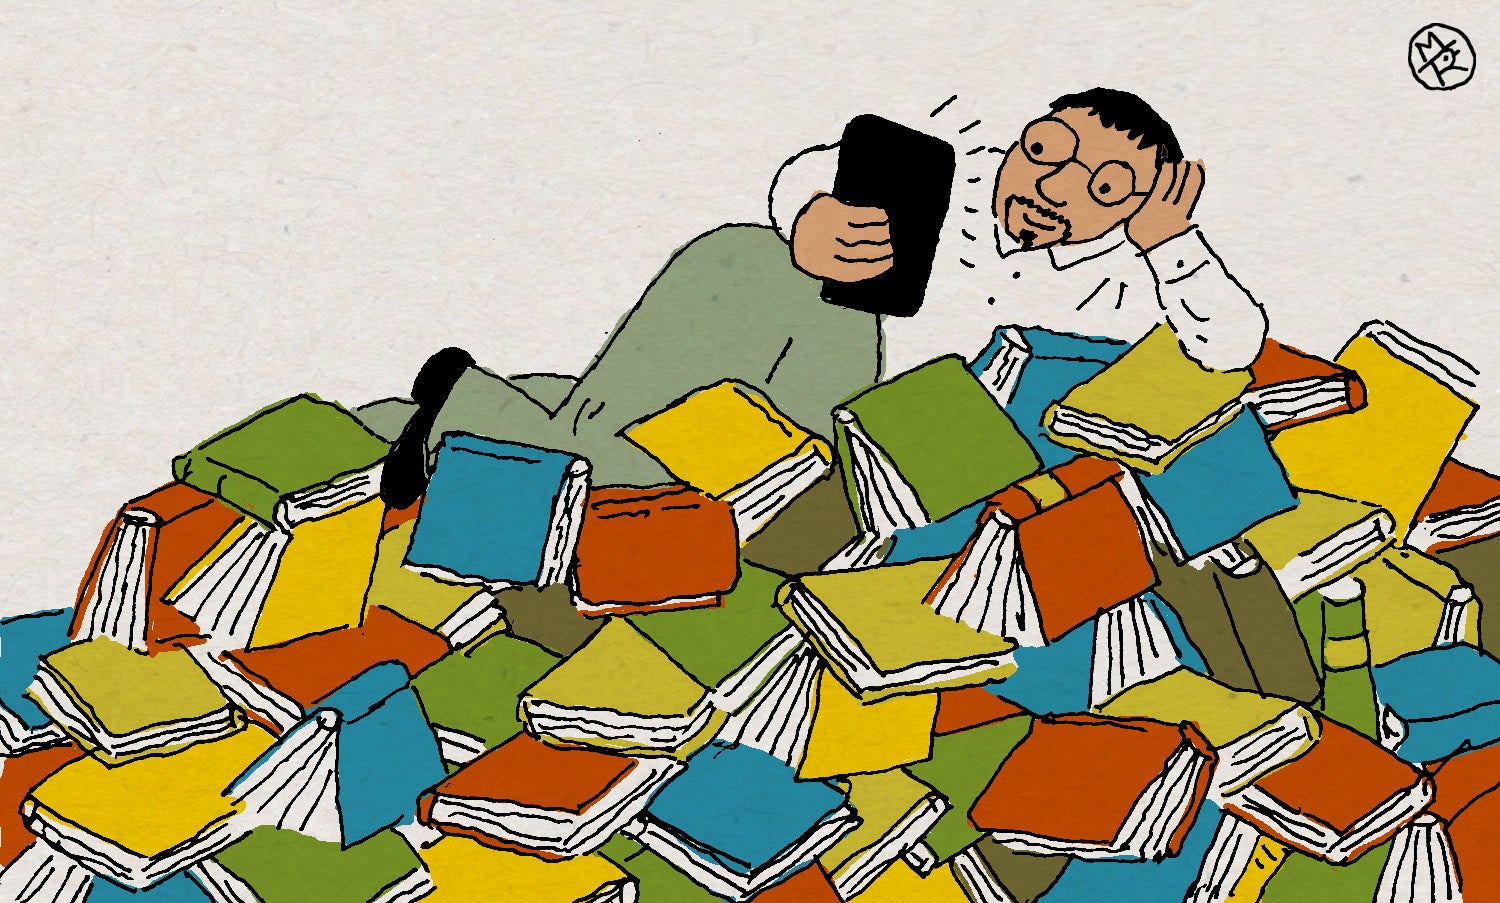 An illustration of a man laying on a pile of green, yellow and red books while looking at an electronic devise.